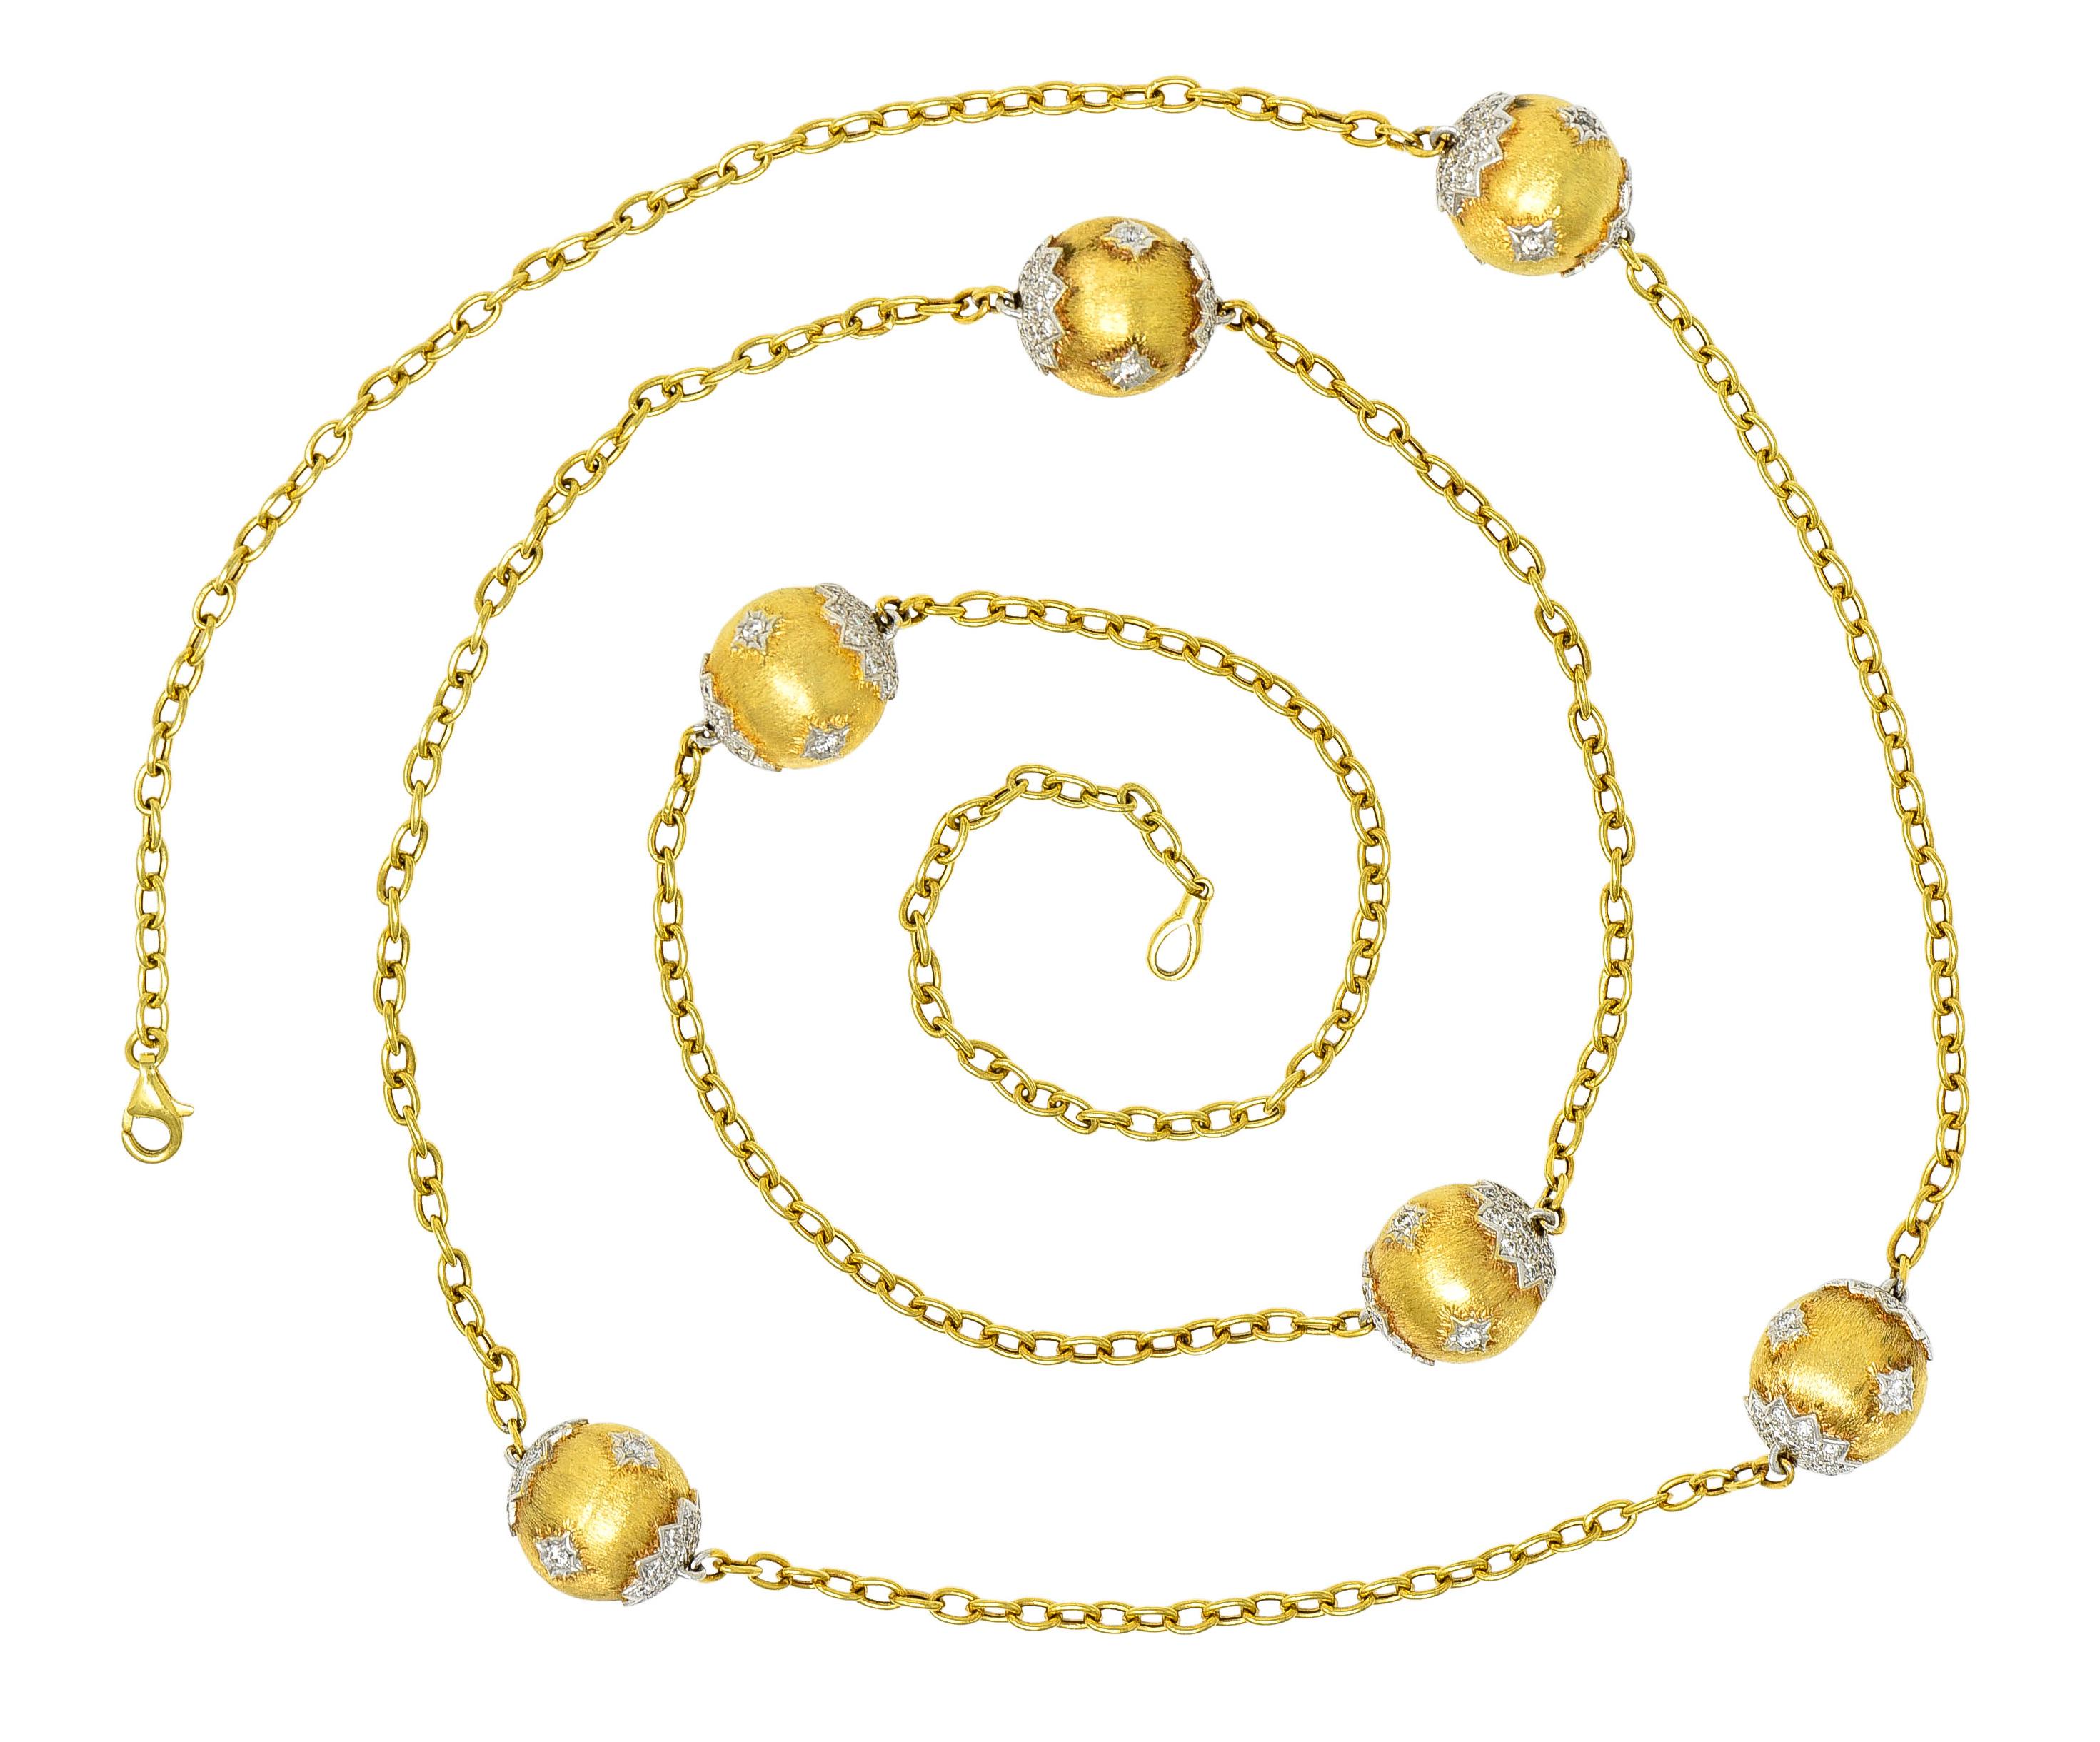 Designed as a cable chain with six sphere shaped stations with fine brushed gold linear texture. Featuring a platinum topped lace motif with round brilliant cut diamonds bead set throughout. Weighing approximately 3.60 carats total - G/H color with